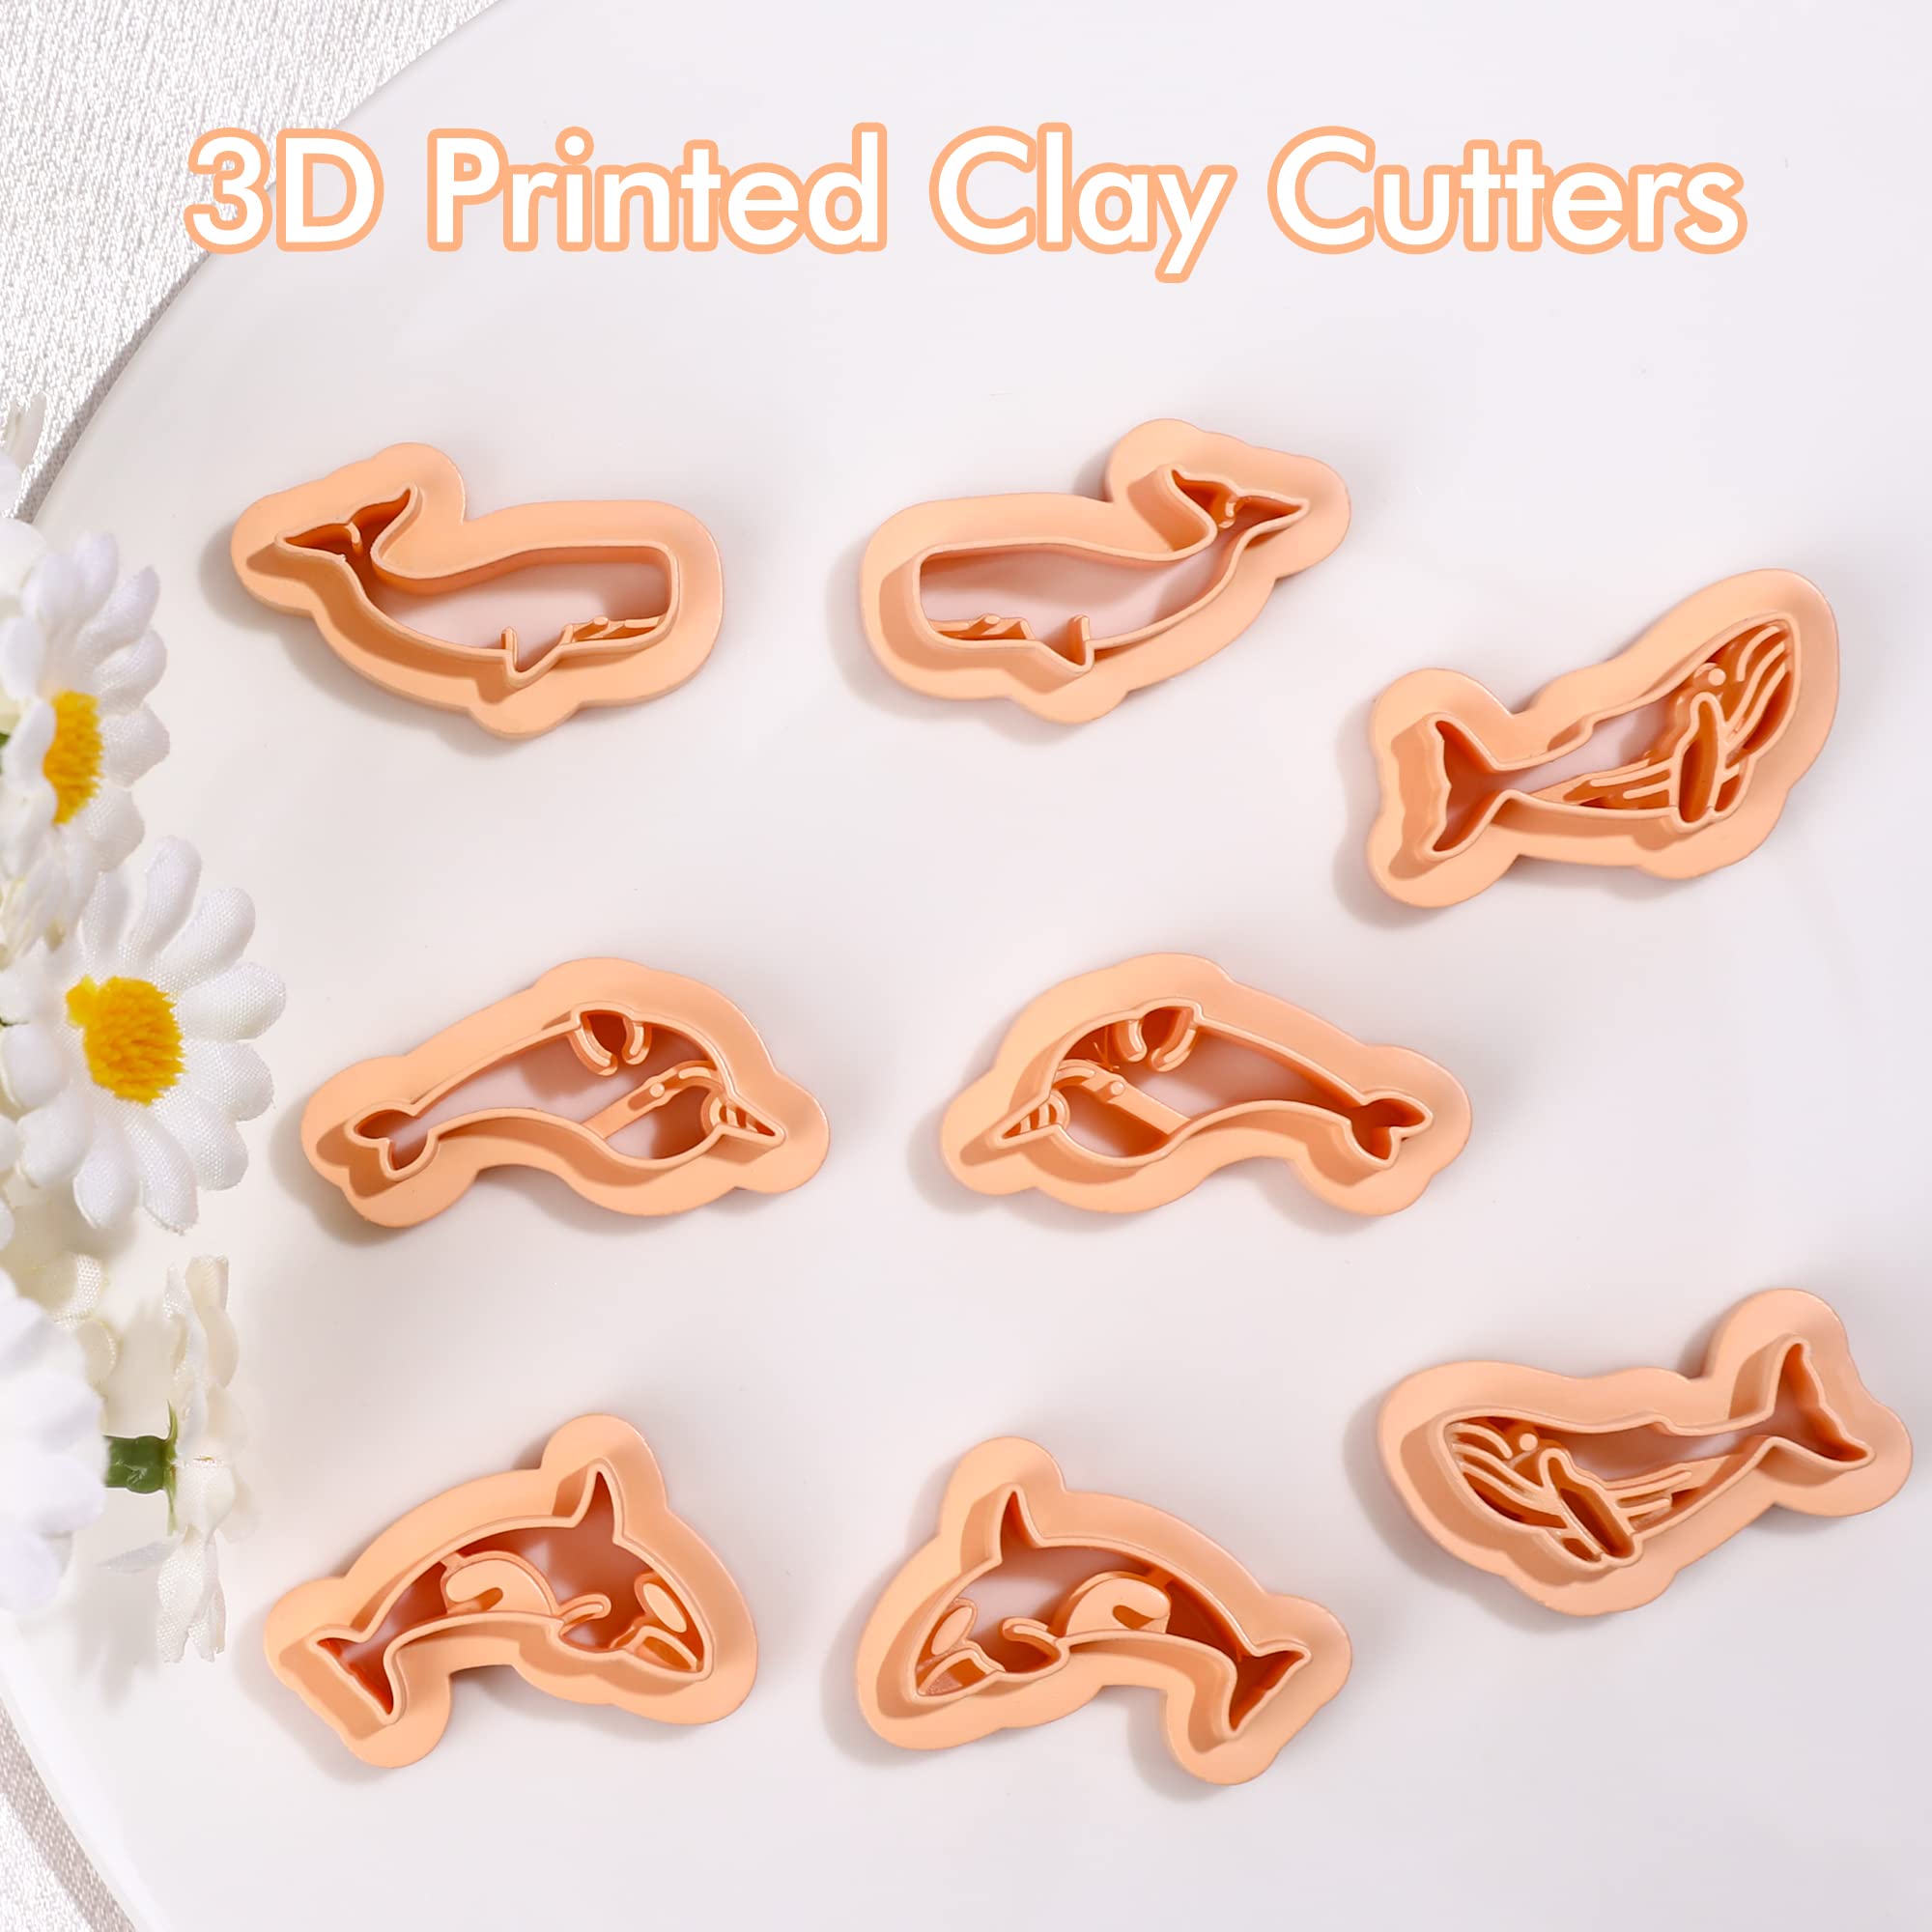 Puocaon Whale Clay Earring Cutters 8 Pcs